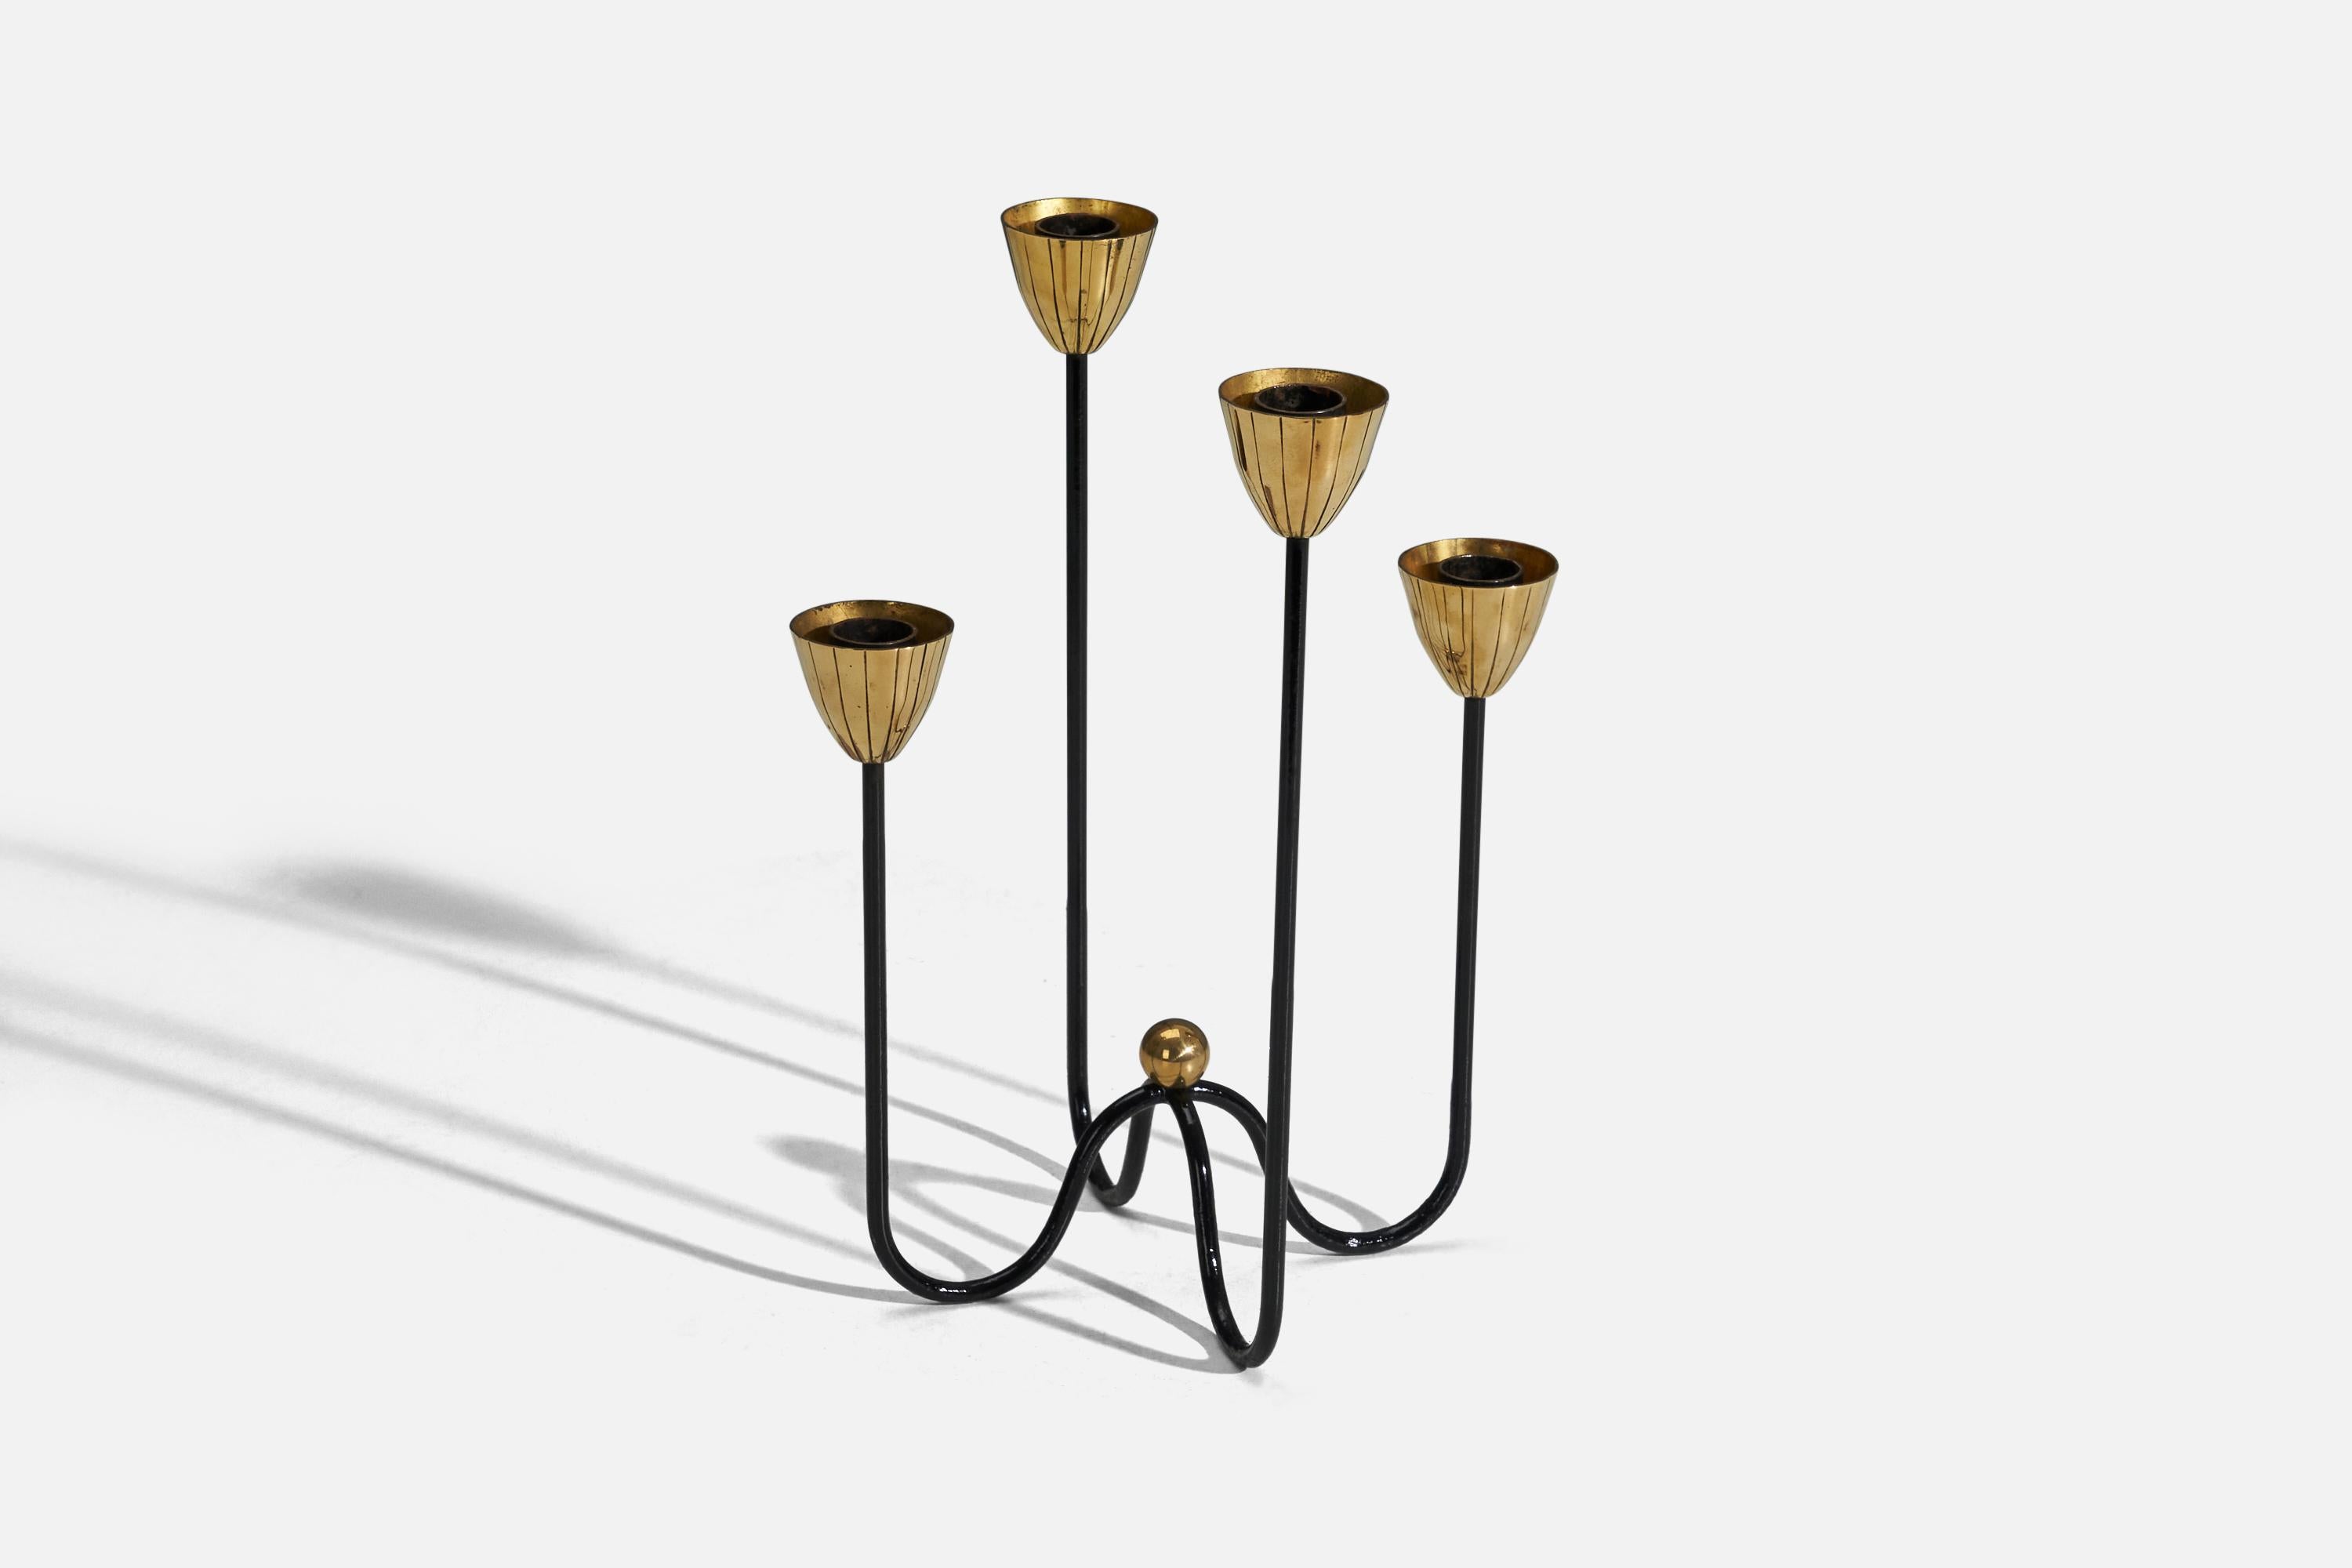 A metal and brass candelabra designed and produced by Gunnar Ander, Sweden, 1950s.